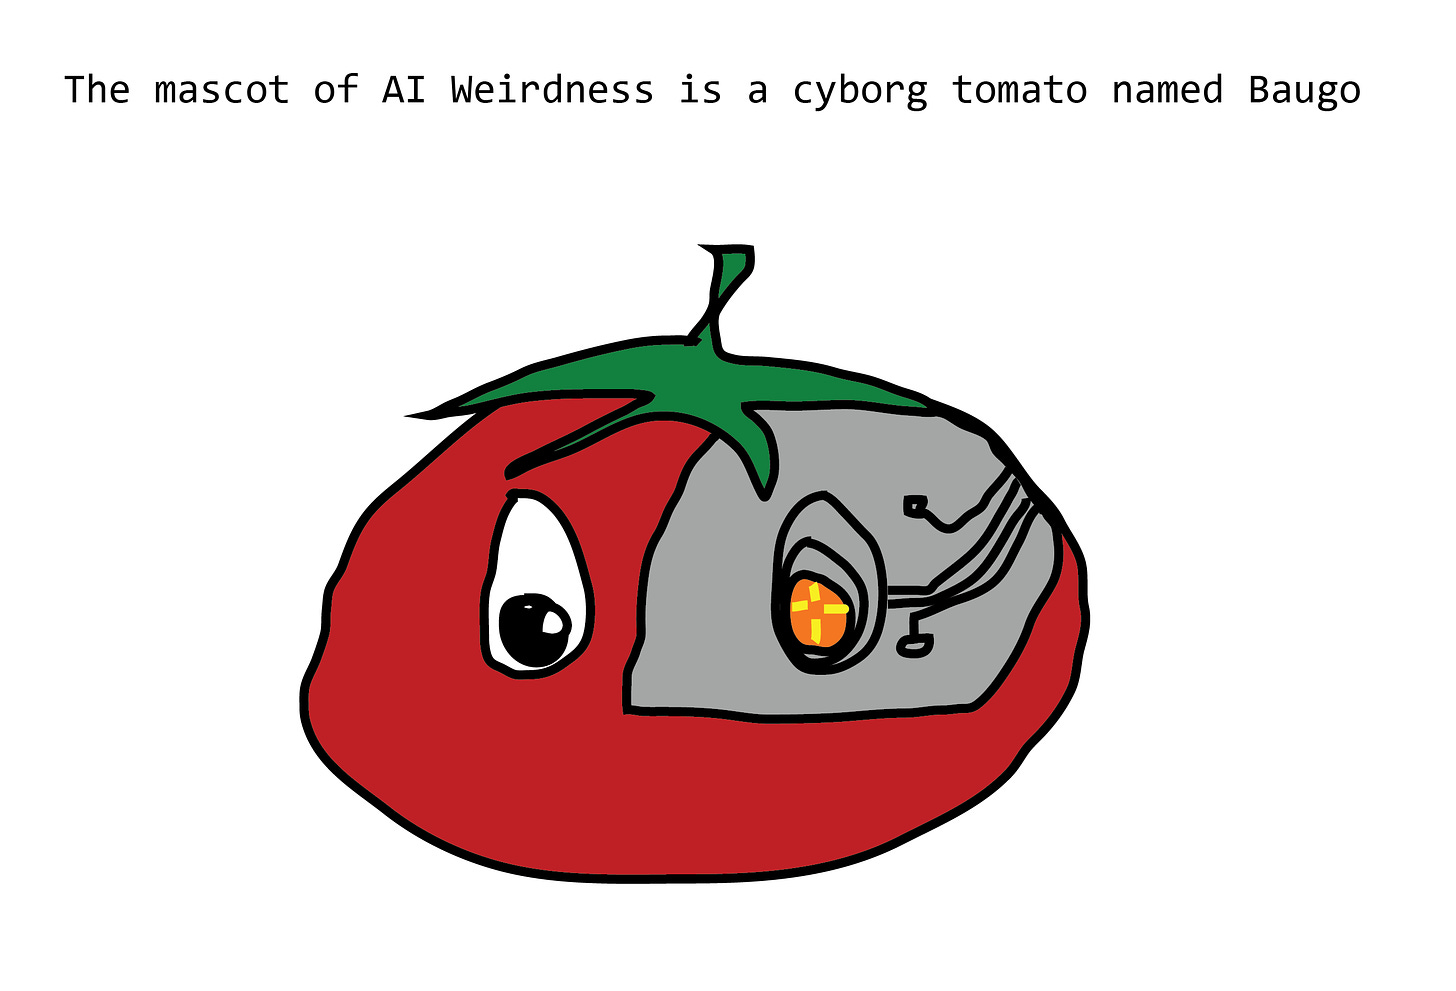 "The mascot of AI Weirdness is a cyborg tomato named Baugo". Tomato has a partially metal head, with one eye an orange telescoped thing with circuits and crosshairs.